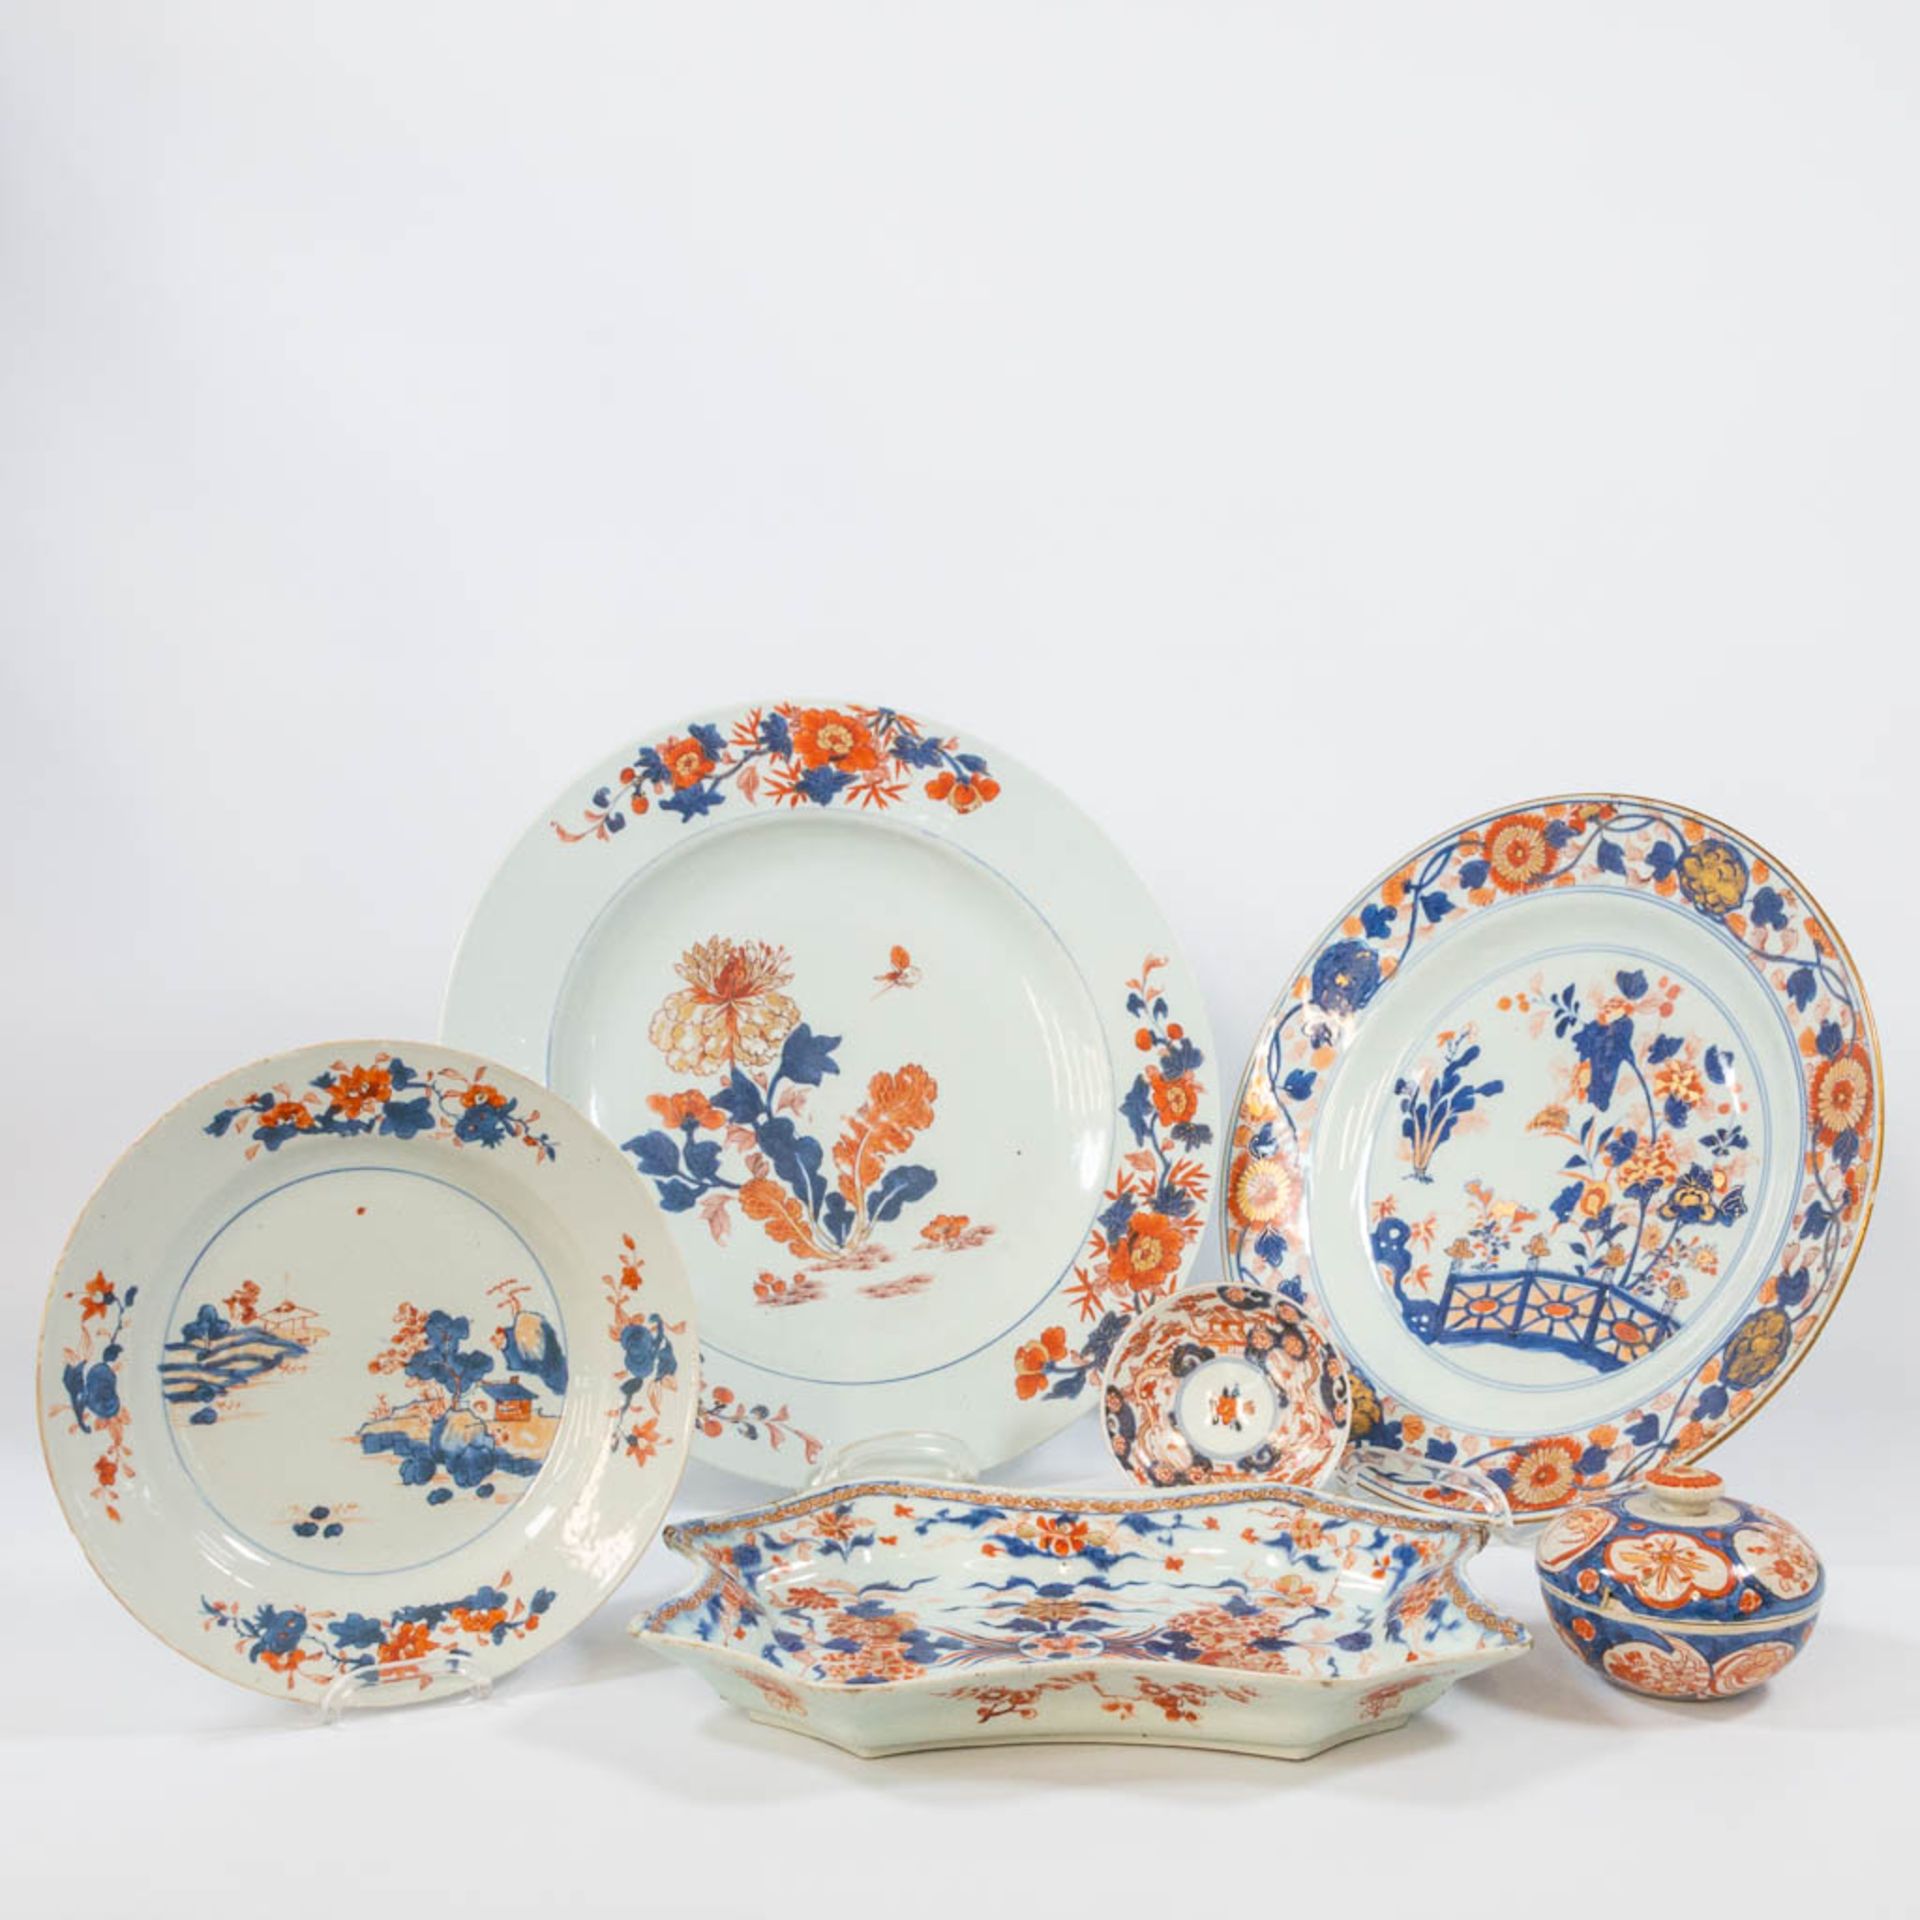 A collection of 6 famille rose objects and plates, made of porcelain.